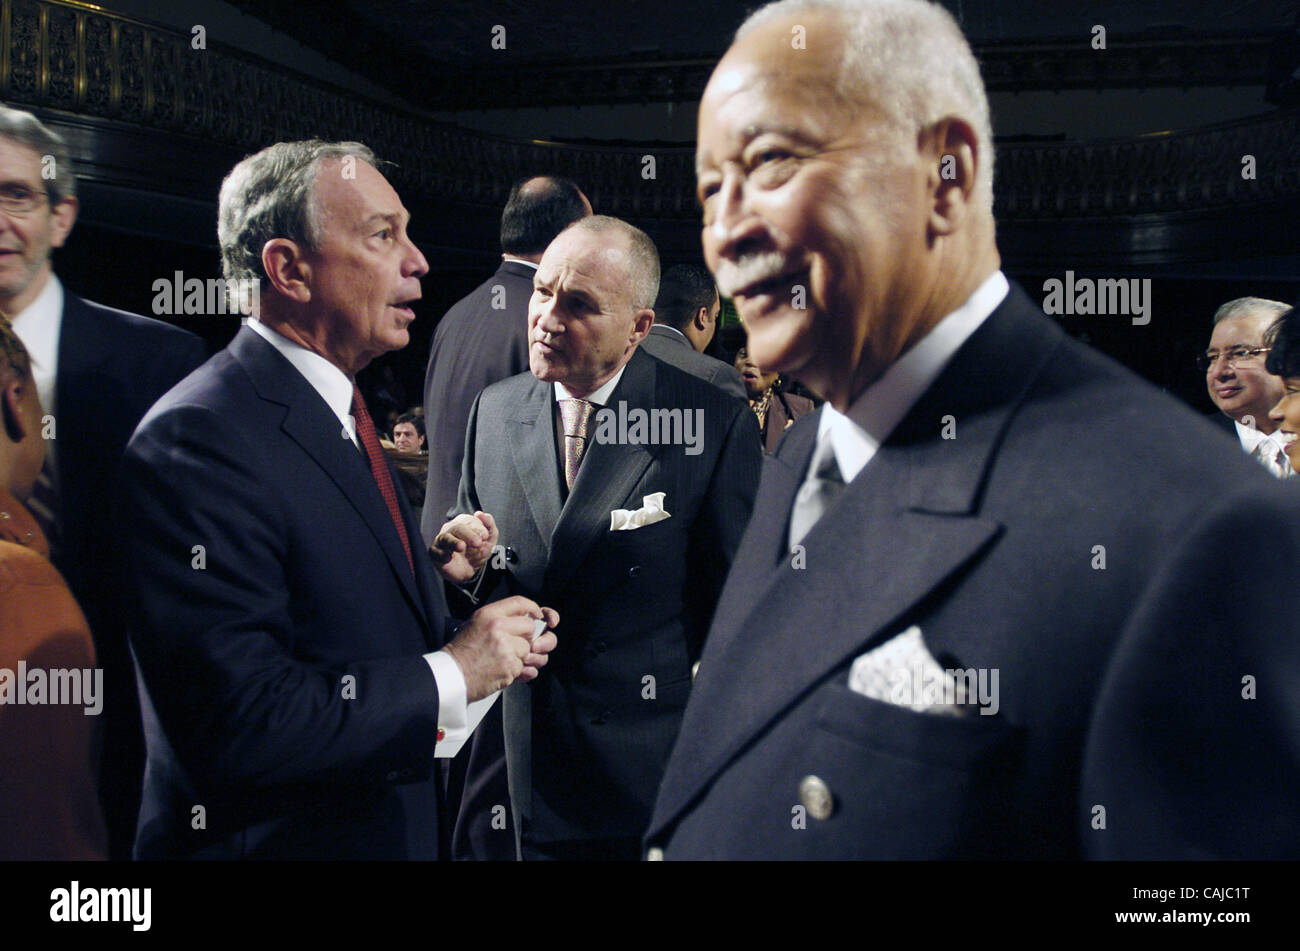 Mayor Michael Bloomberg (Center L) speaks with Police Commissioner Ray Kelly (Center R) as former Mayor David Dinkins (R) looks on. Breakfast reception to commemorate the birthday of Dr. Martin Luther King, Jr. hosted by Mayor Michael Bloomberg at City Council Chambers, City Hall. Stock Photo